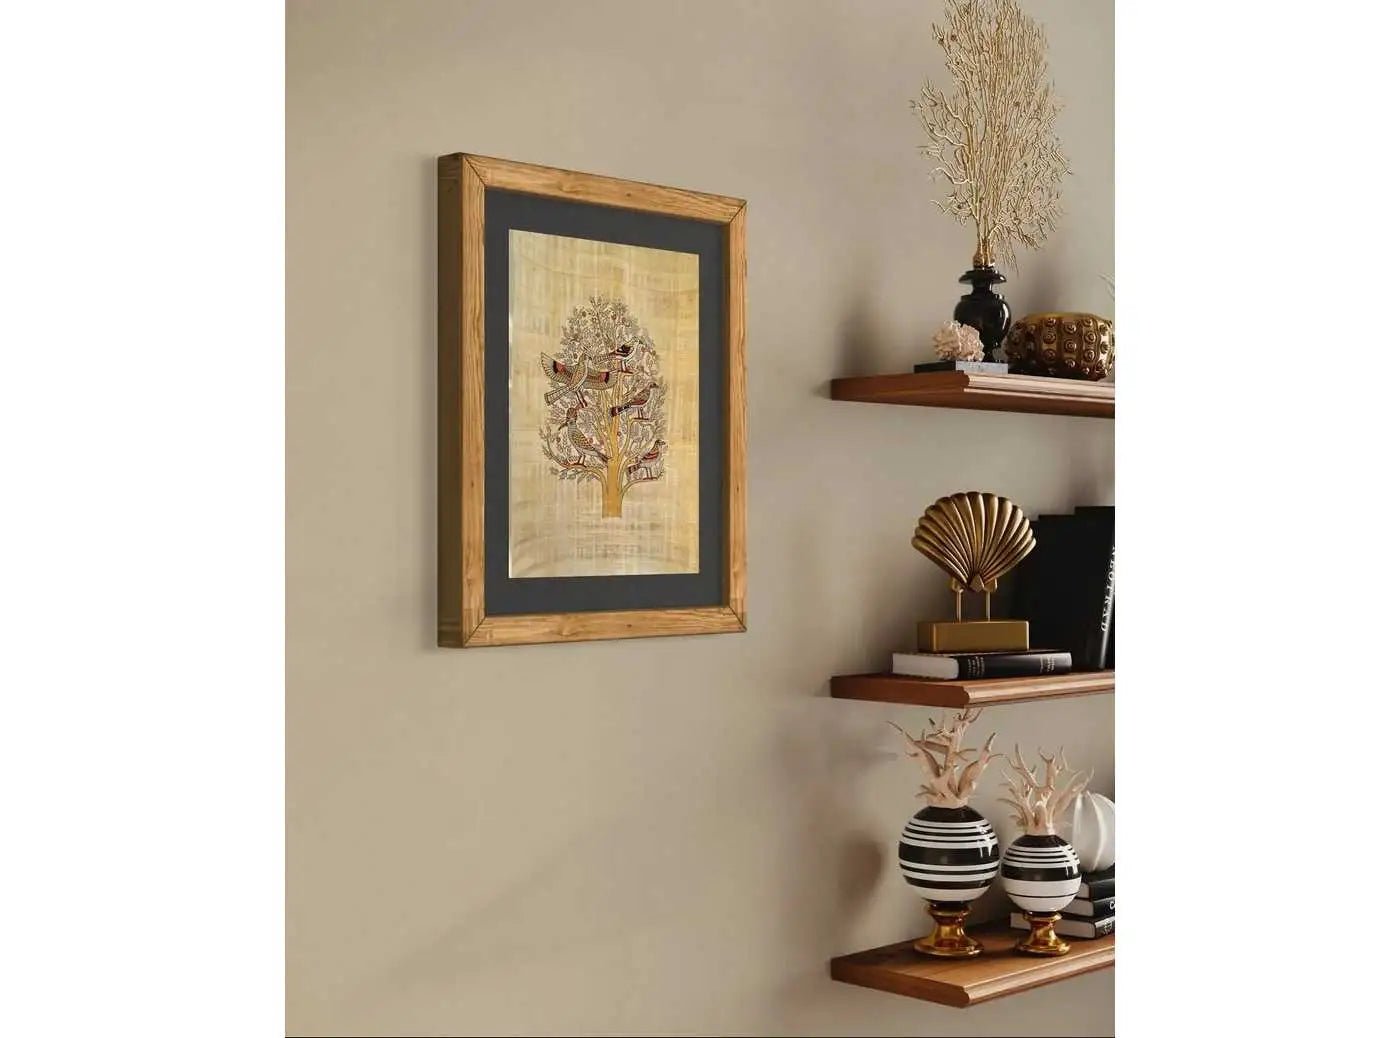 Tree of Life - Ancient Egyptian Papyrus Painting - Ancient Egypt Papyrus Paper - Egypt Wall Decor - Papyrus Wall Art